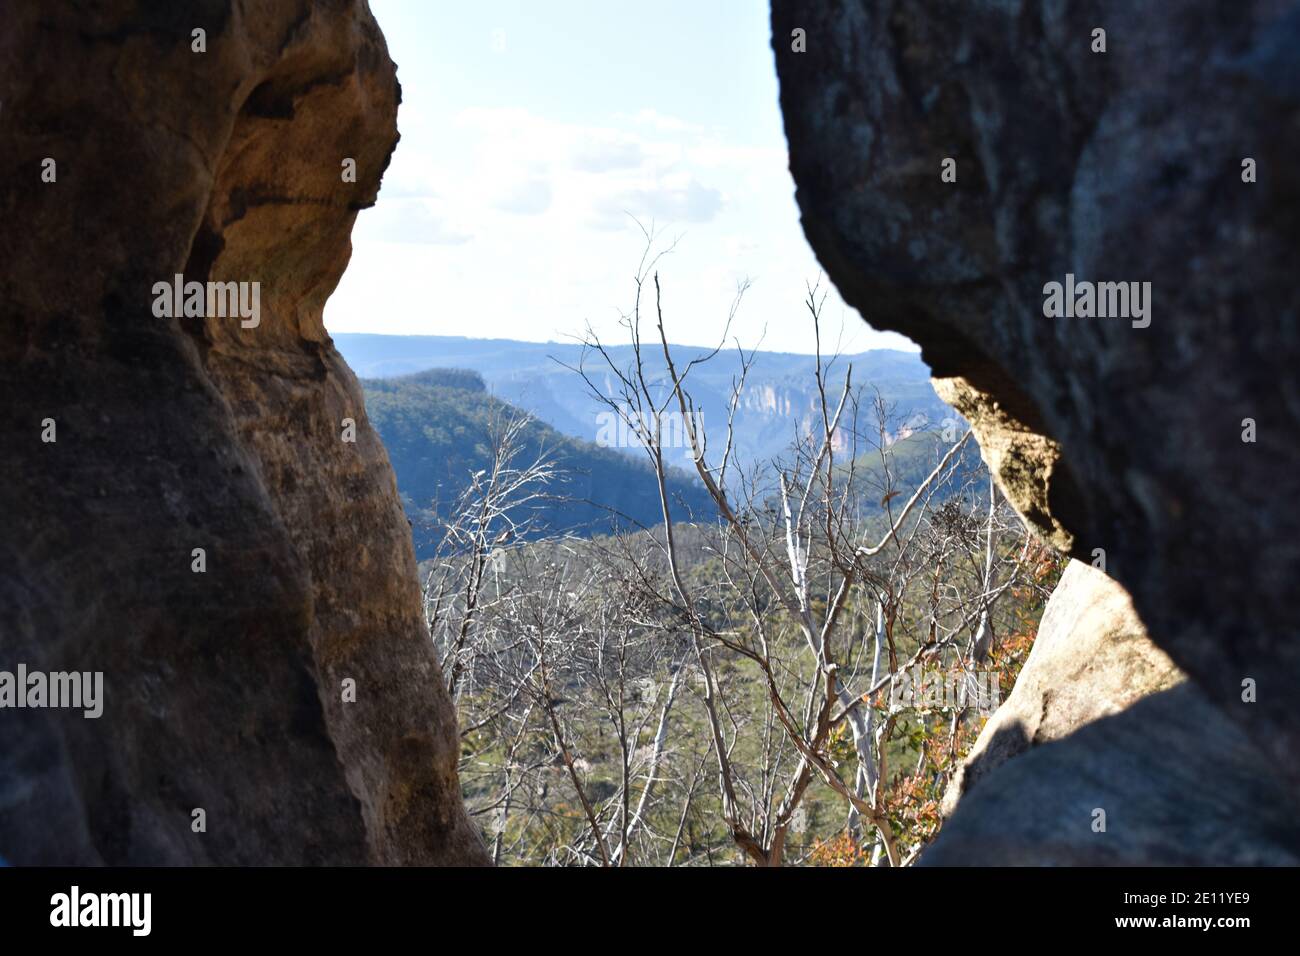 a hole in a cliff face on a mountain with blue mountain views in the background Stock Photo